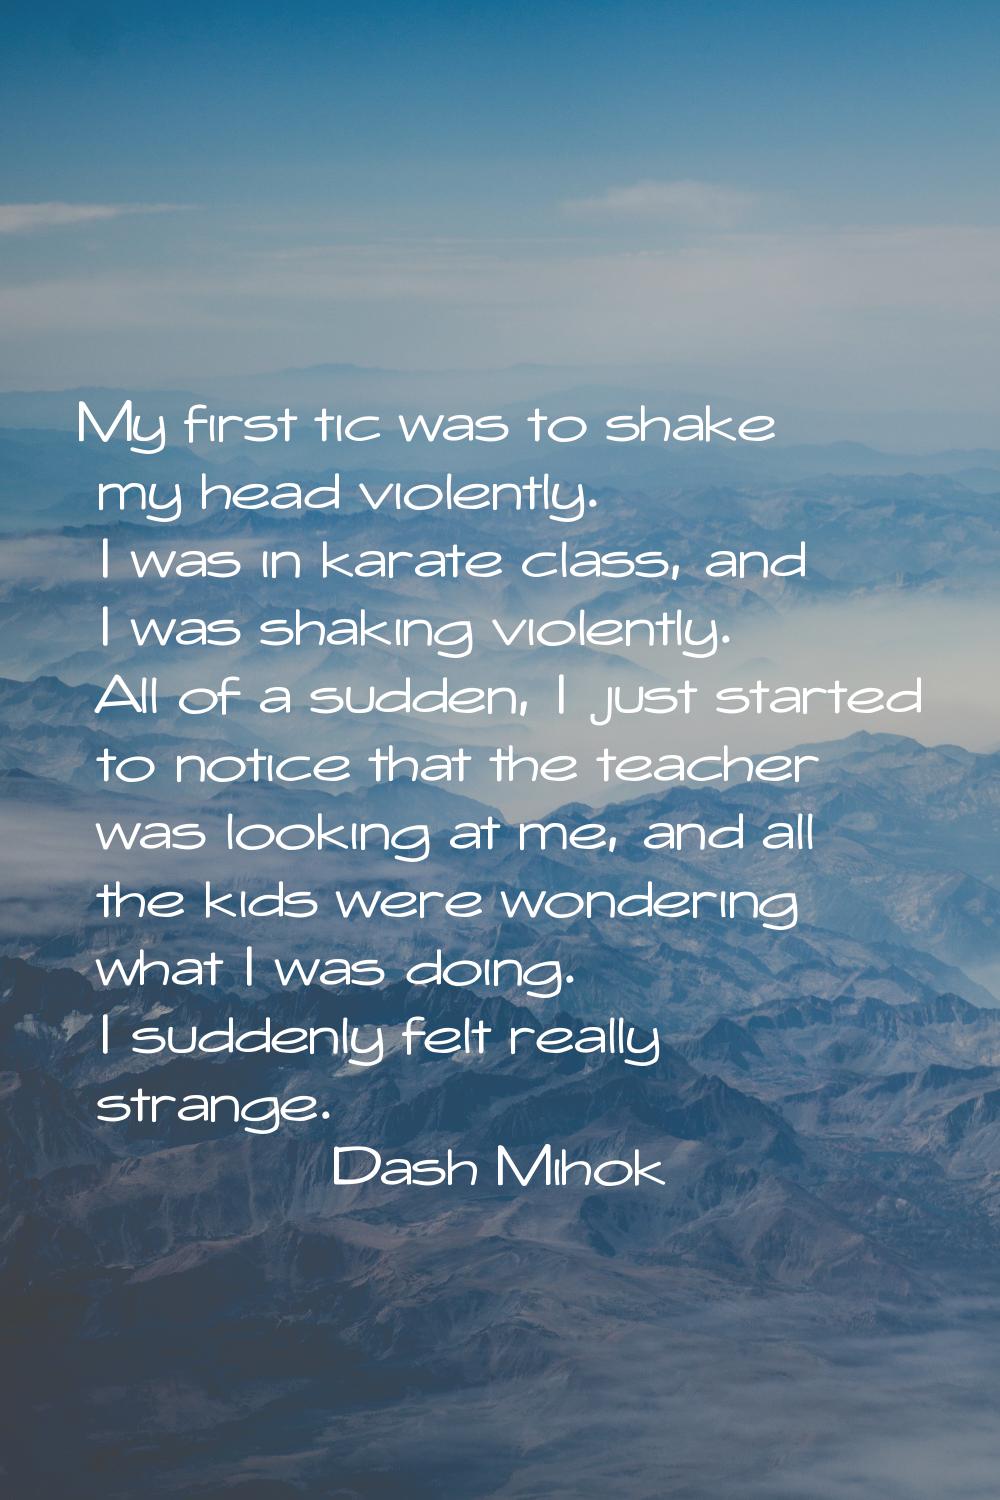 My first tic was to shake my head violently. I was in karate class, and I was shaking violently. Al